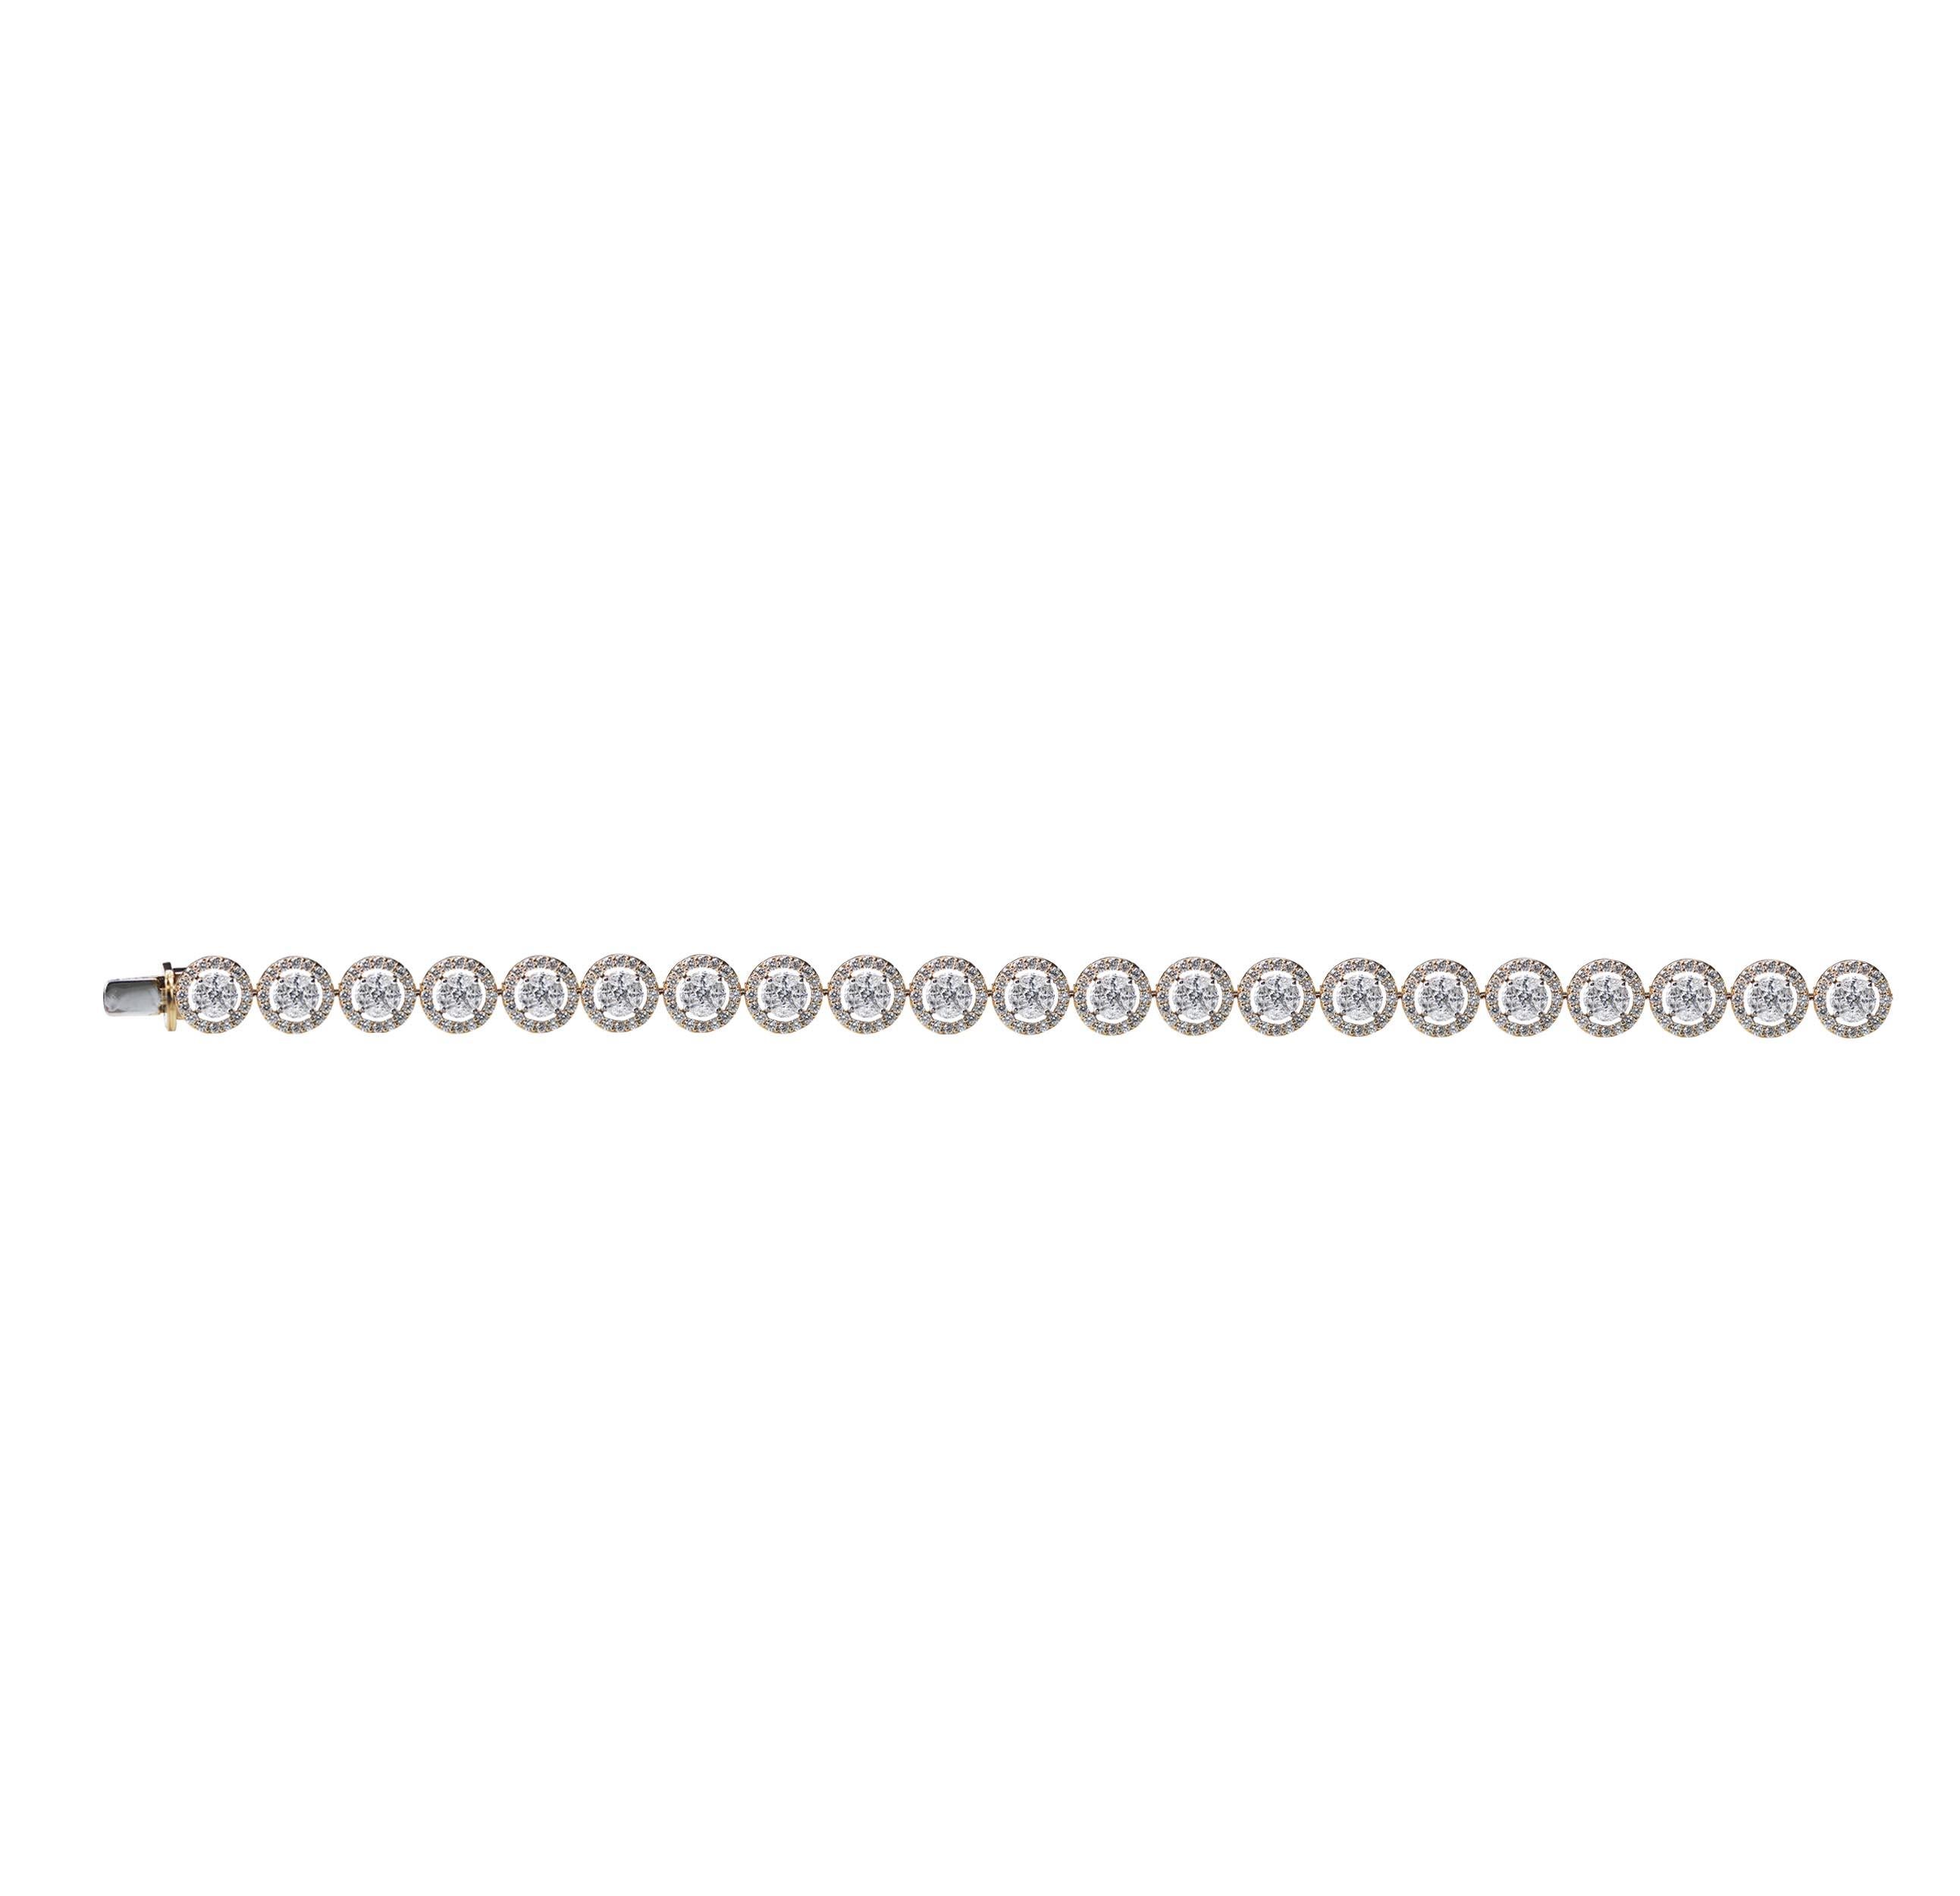 F-G/ VS-SI brilliant cut diamonds tennis bracelet

Paying homage to restrained opulence is this classic 18K white and rose gold tennis bracelet adorned with F-G color, VS-SI brilliant cut diamonds in a prong and mosaic setting done with marquise and